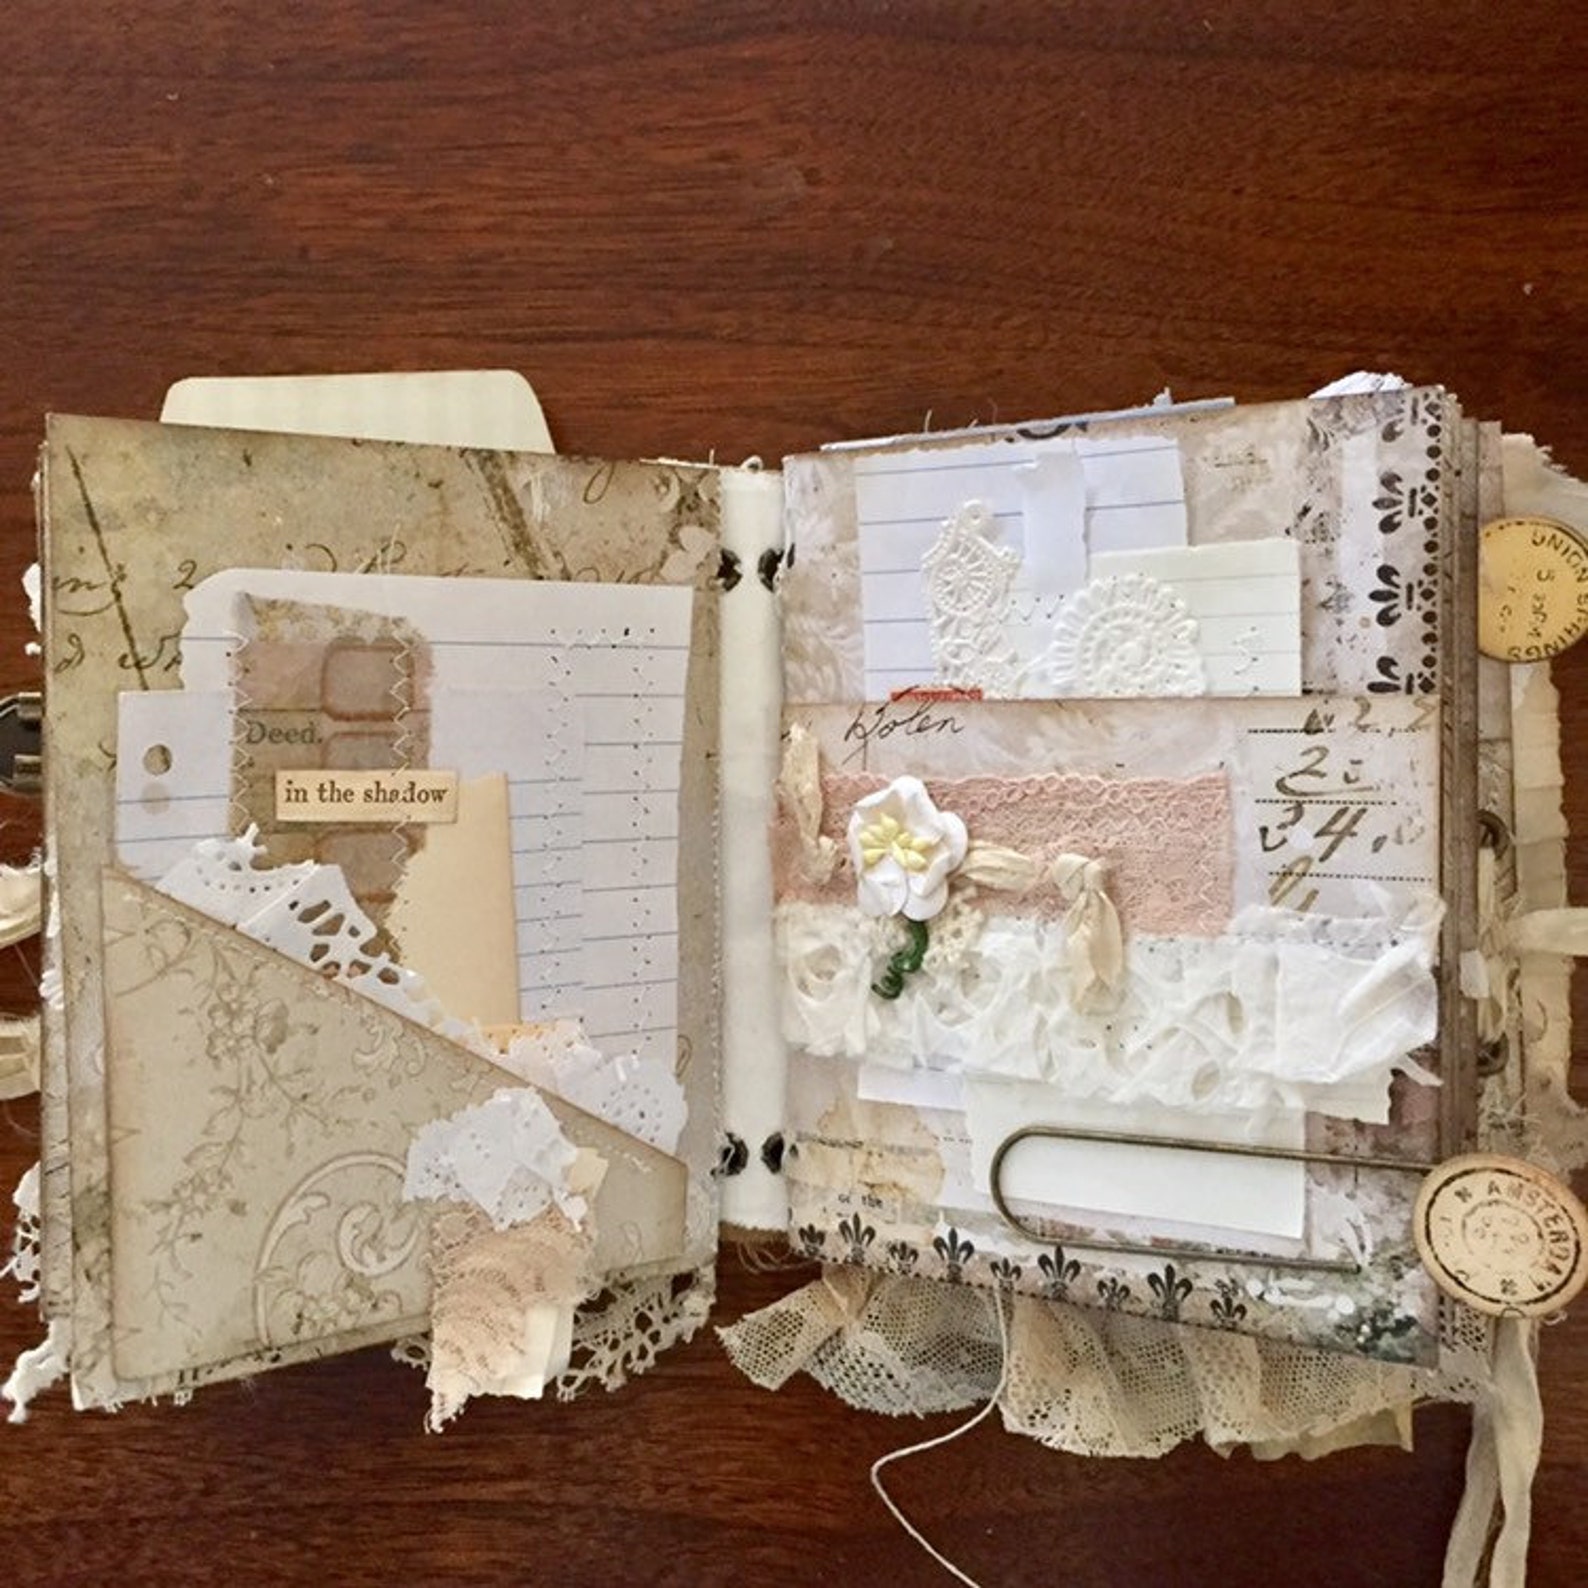 White Lace Romantic Journal Cottage Chic Junk Journal | Etsy